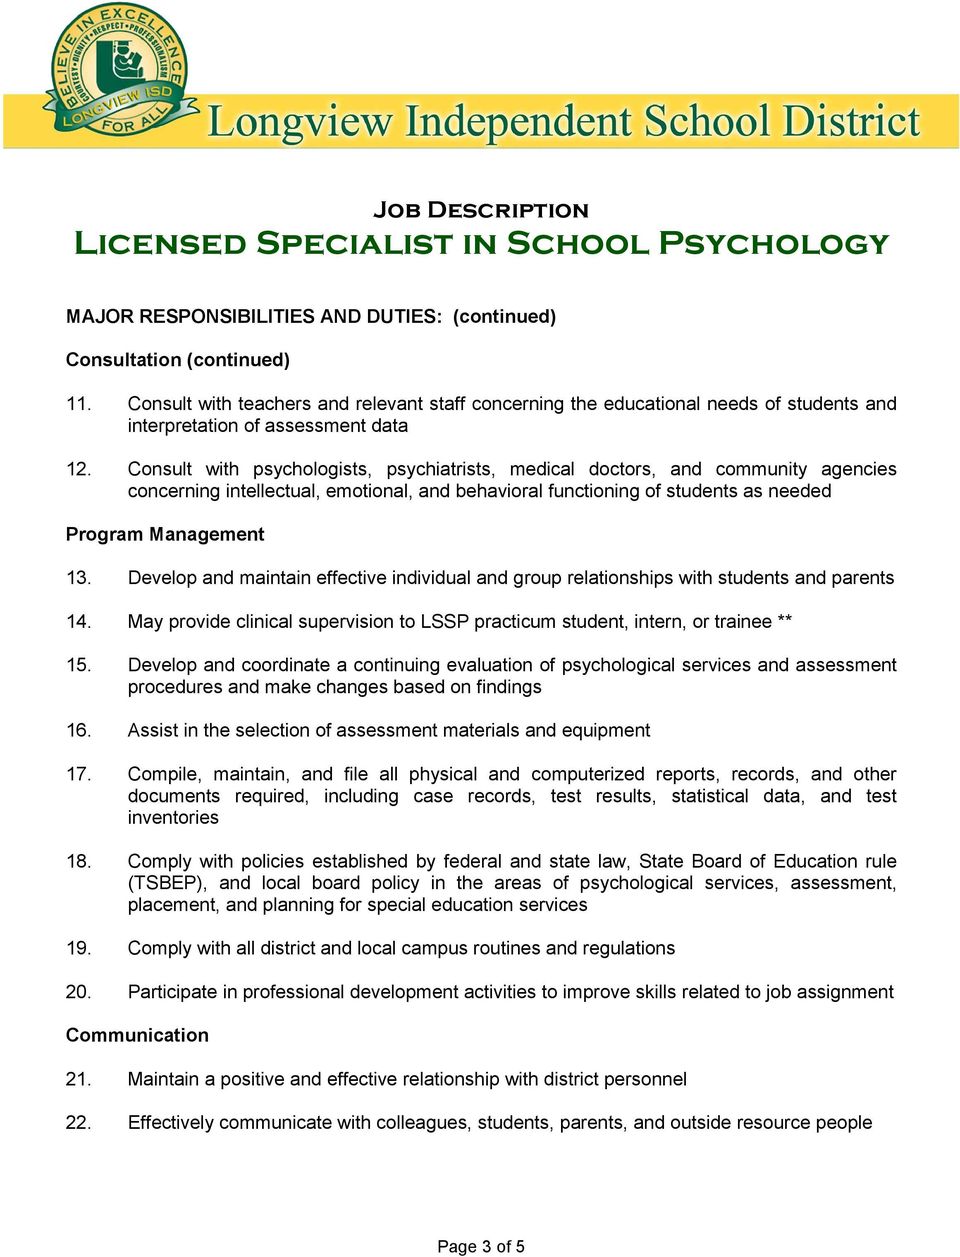 Consult with psychologists, psychiatrists, medical doctors, and community agencies concerning intellectual, emotional, and behavioral functioning of students as needed Program Management 13.